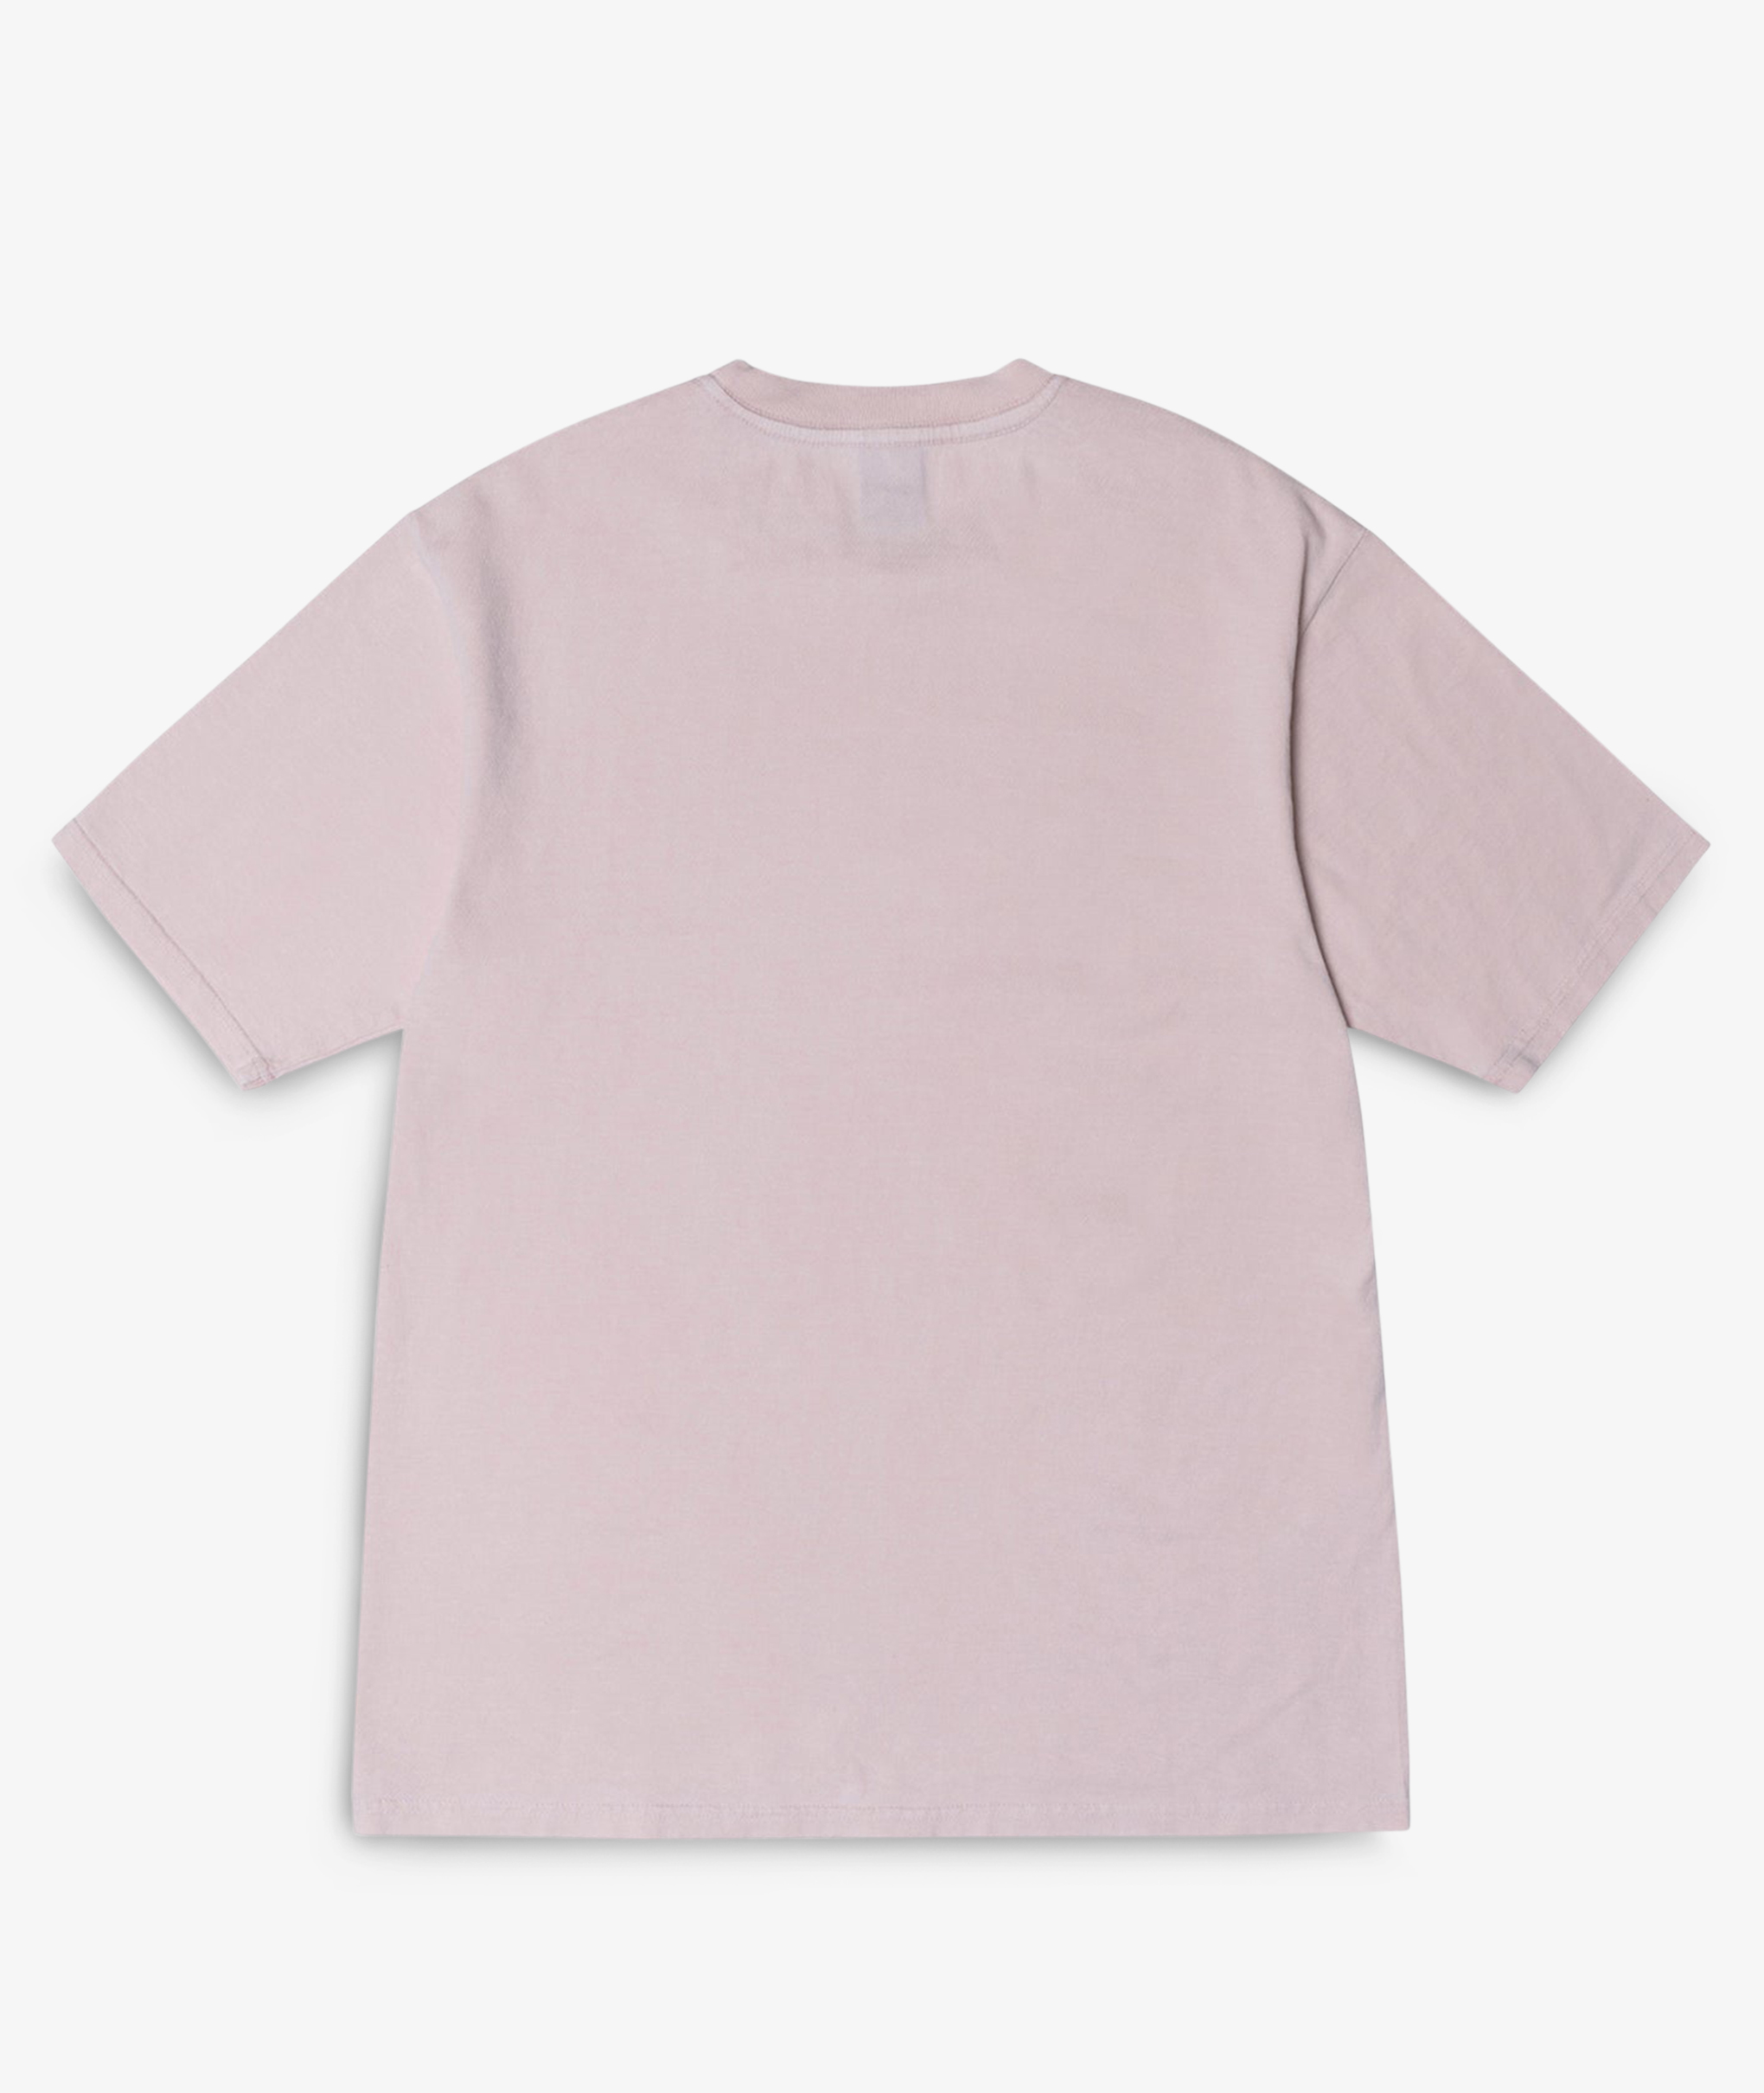 Norse Store | Shipping Worldwide - Stüssy Big & Meaty Pigment Dyed Tee ...